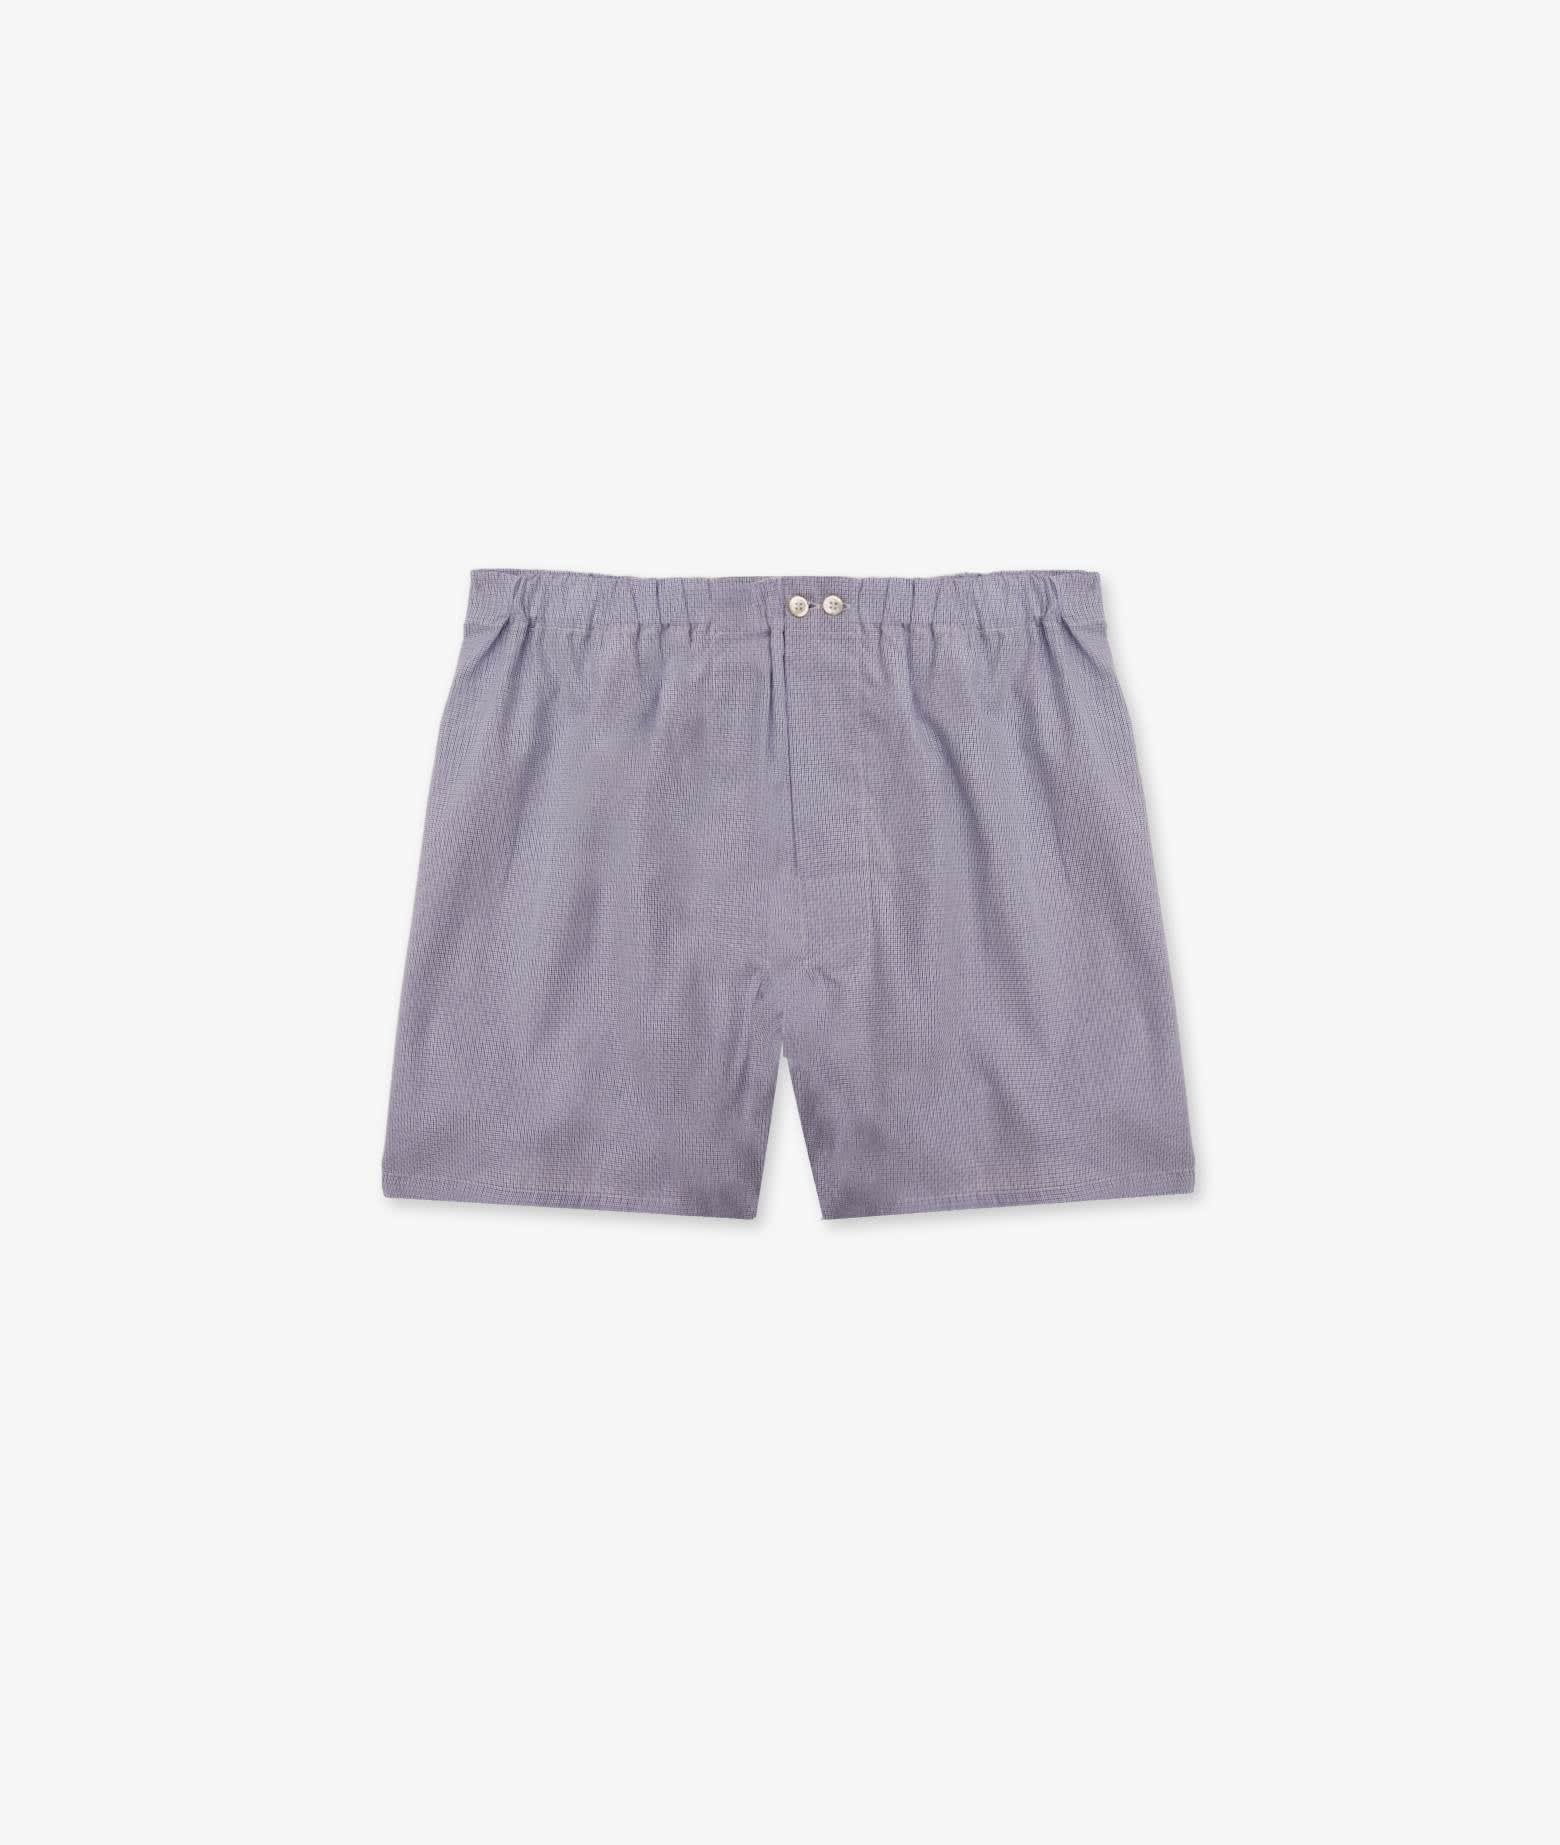 Cotton Boxershorts Knickers